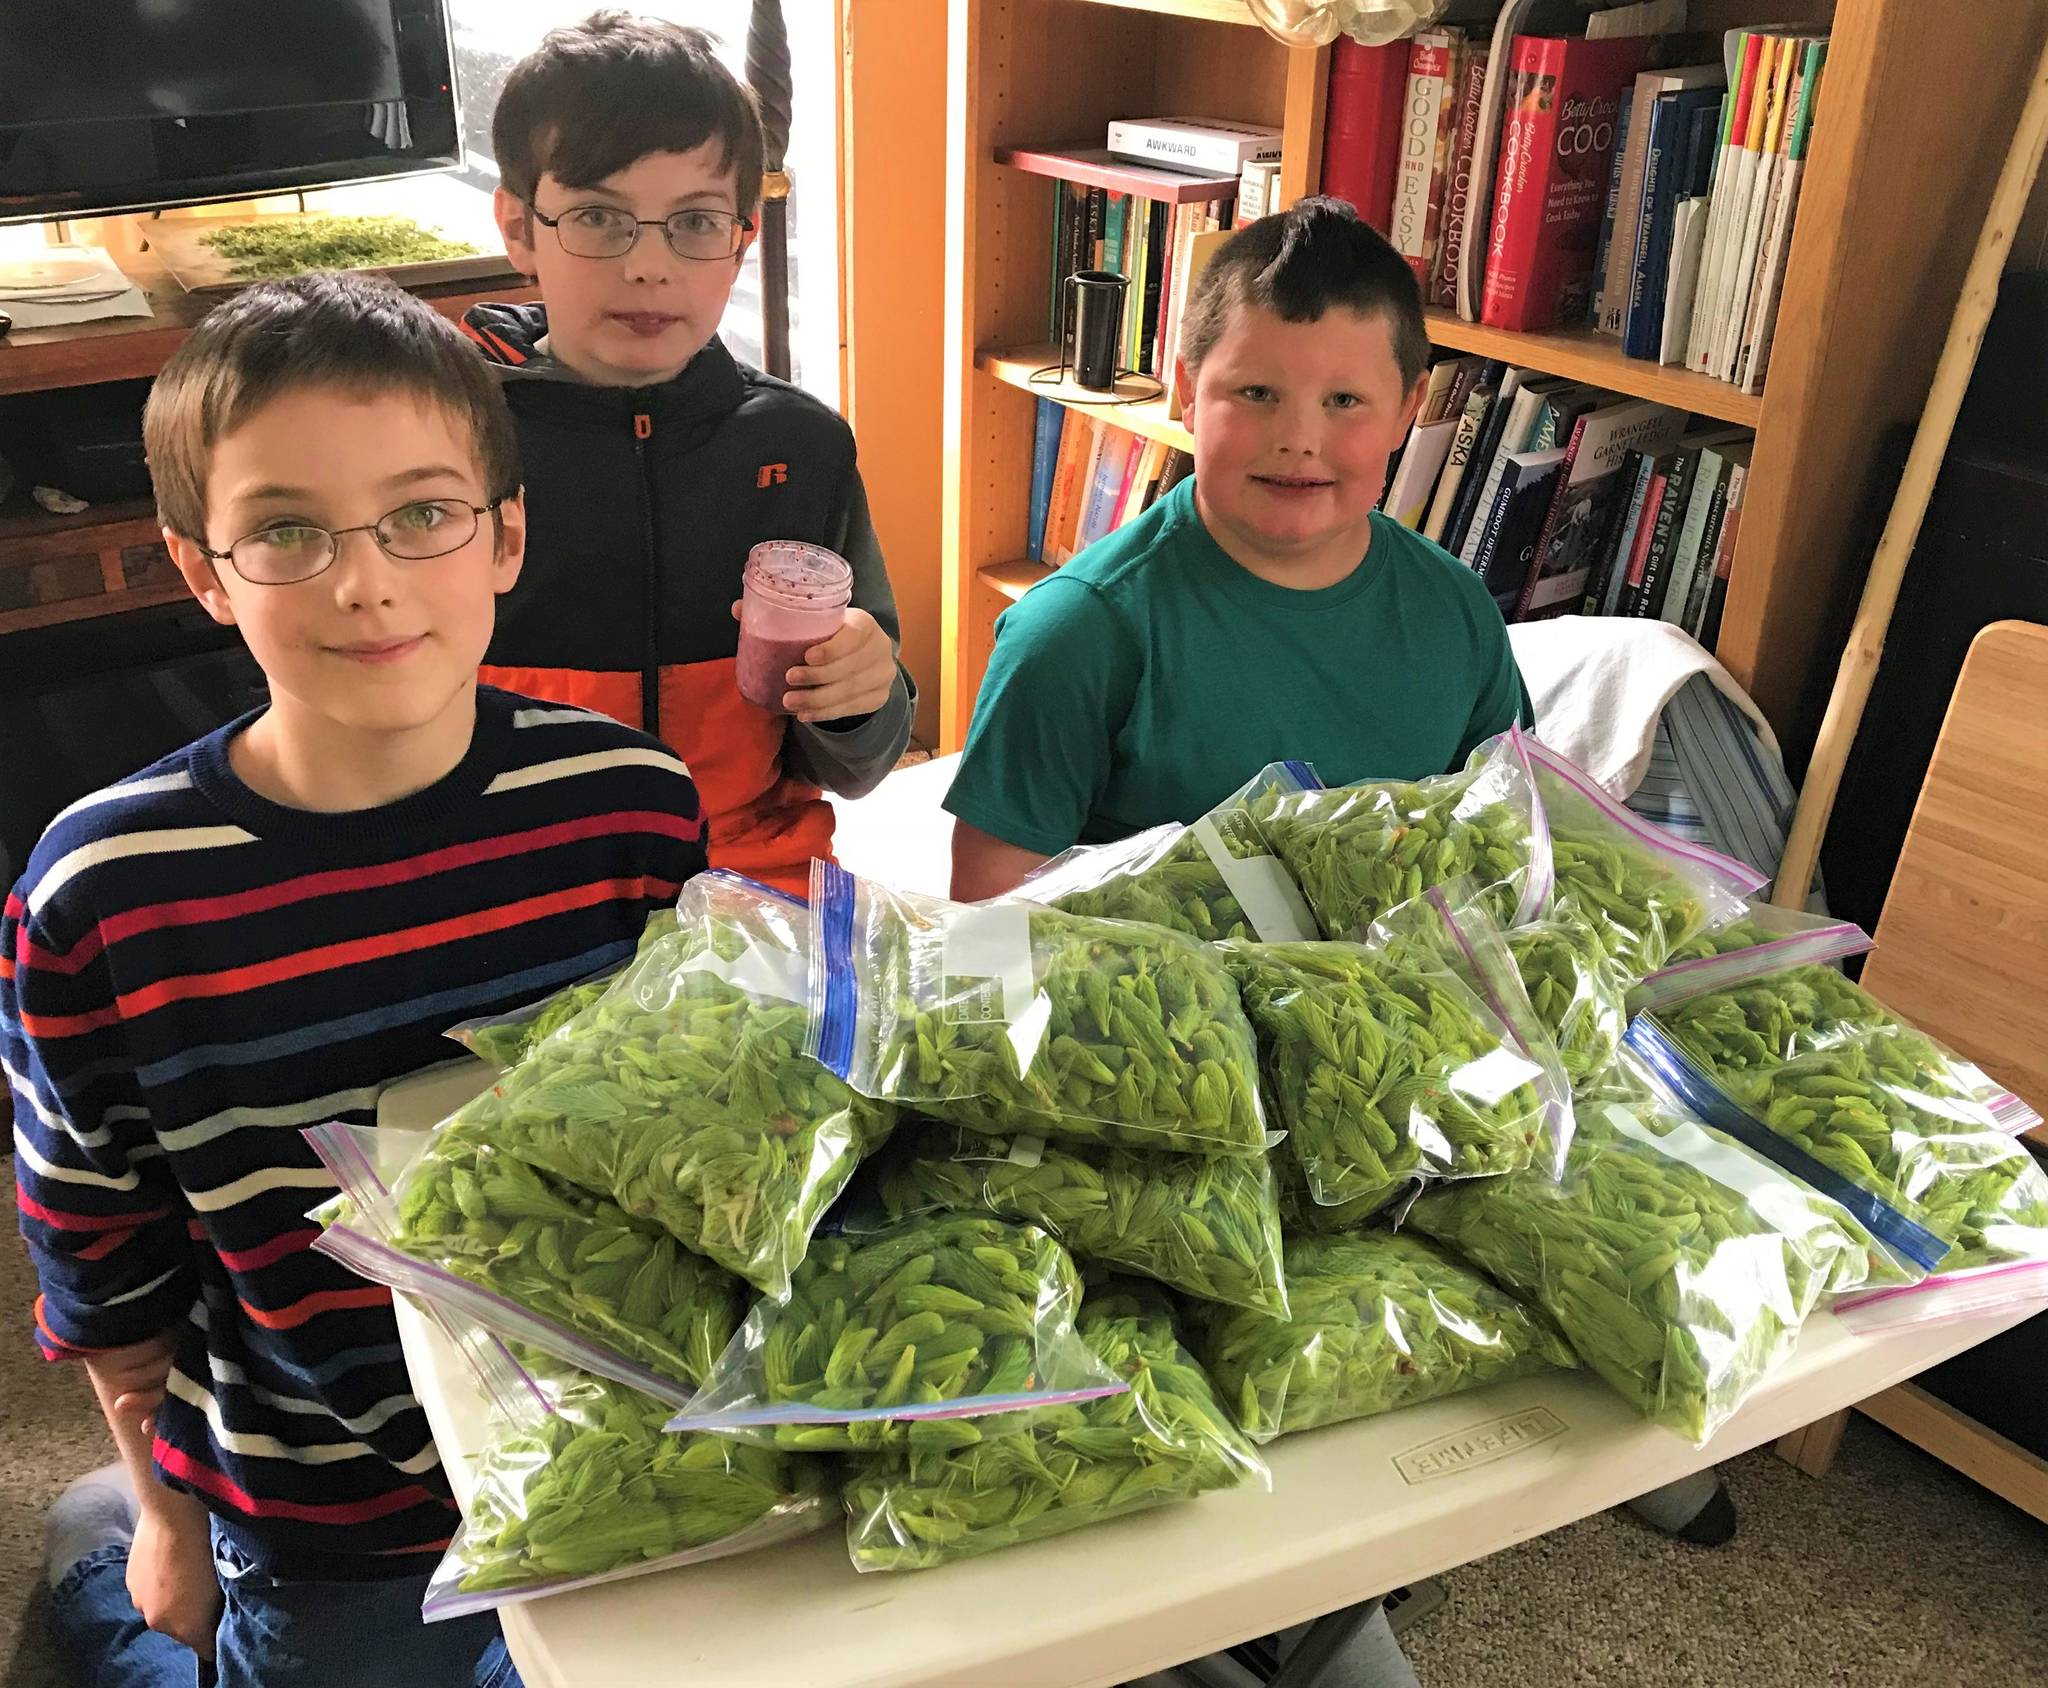 Prescott’s grandsons stand by bagged spruce tips. Vivian Faith Prescott | For the Capital City Weekly